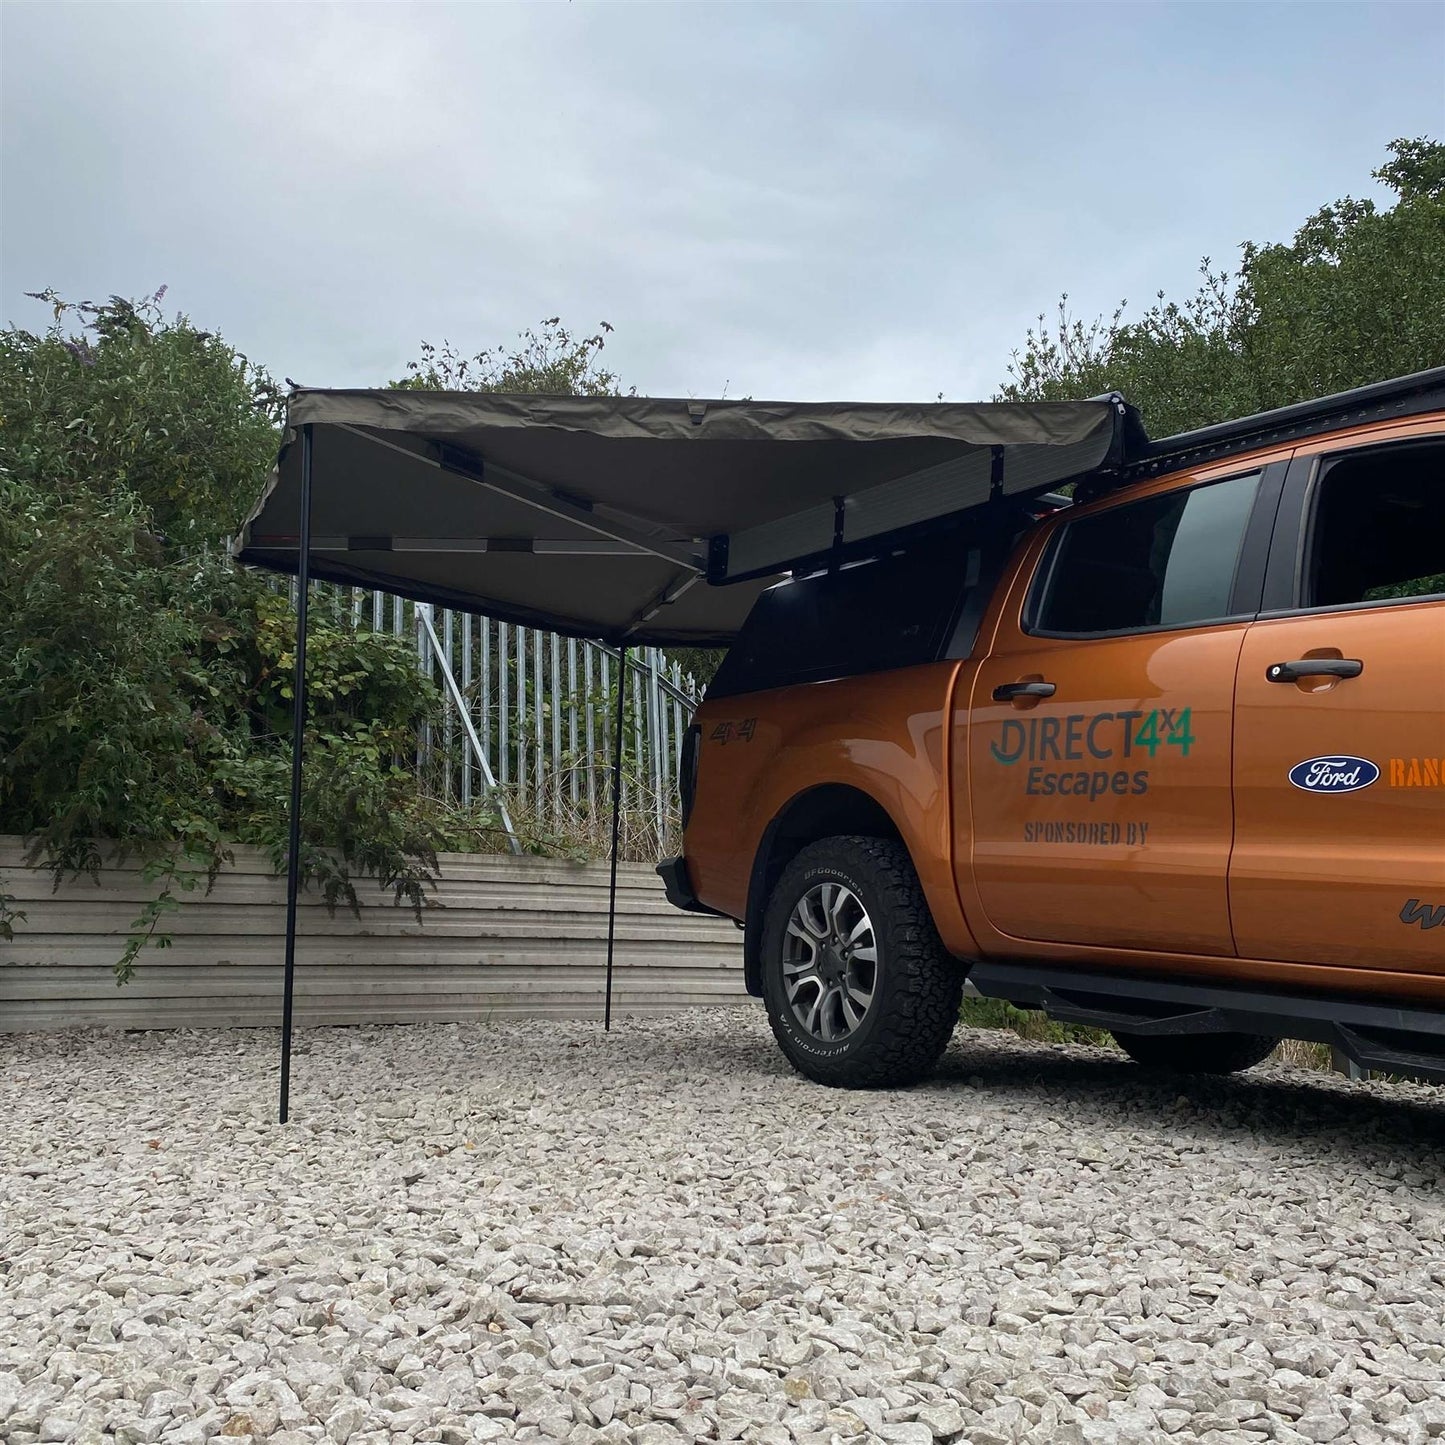 Hawkwing Style 270-Degree RHS Foldout Vehicle Camping Side Awning